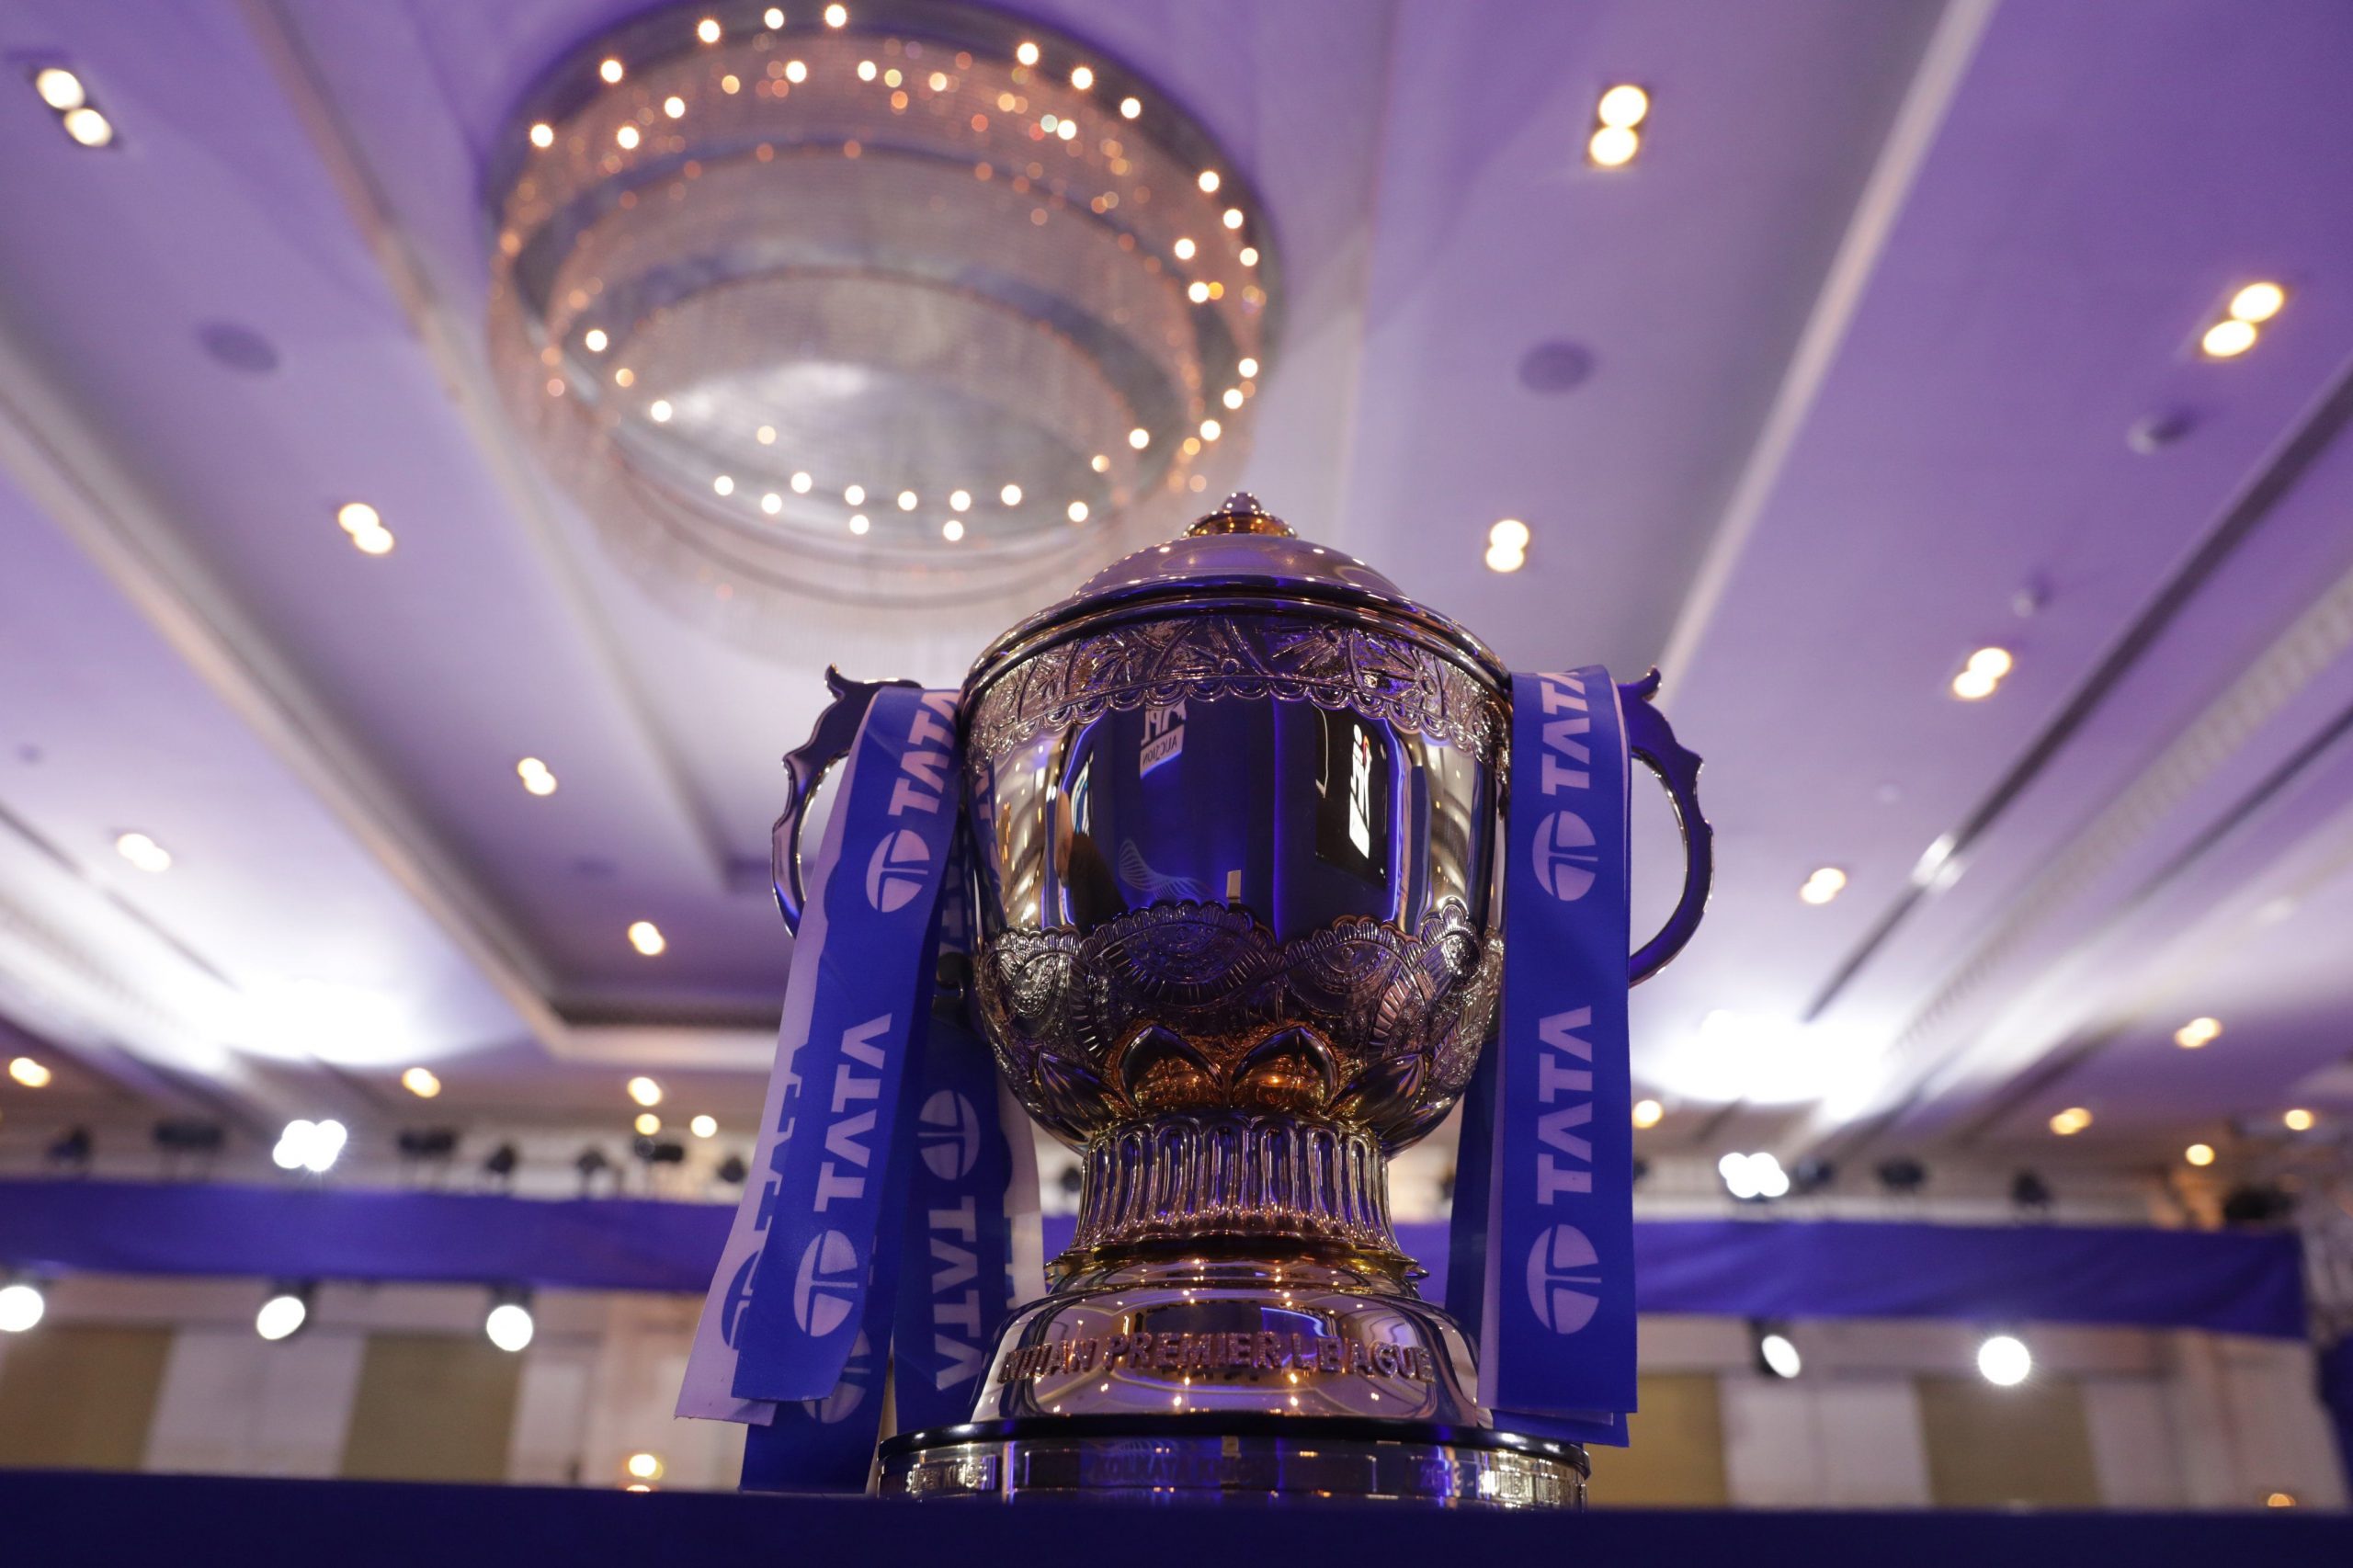 CSK, KKR to meet in IPL 2022 opener at Wankhede